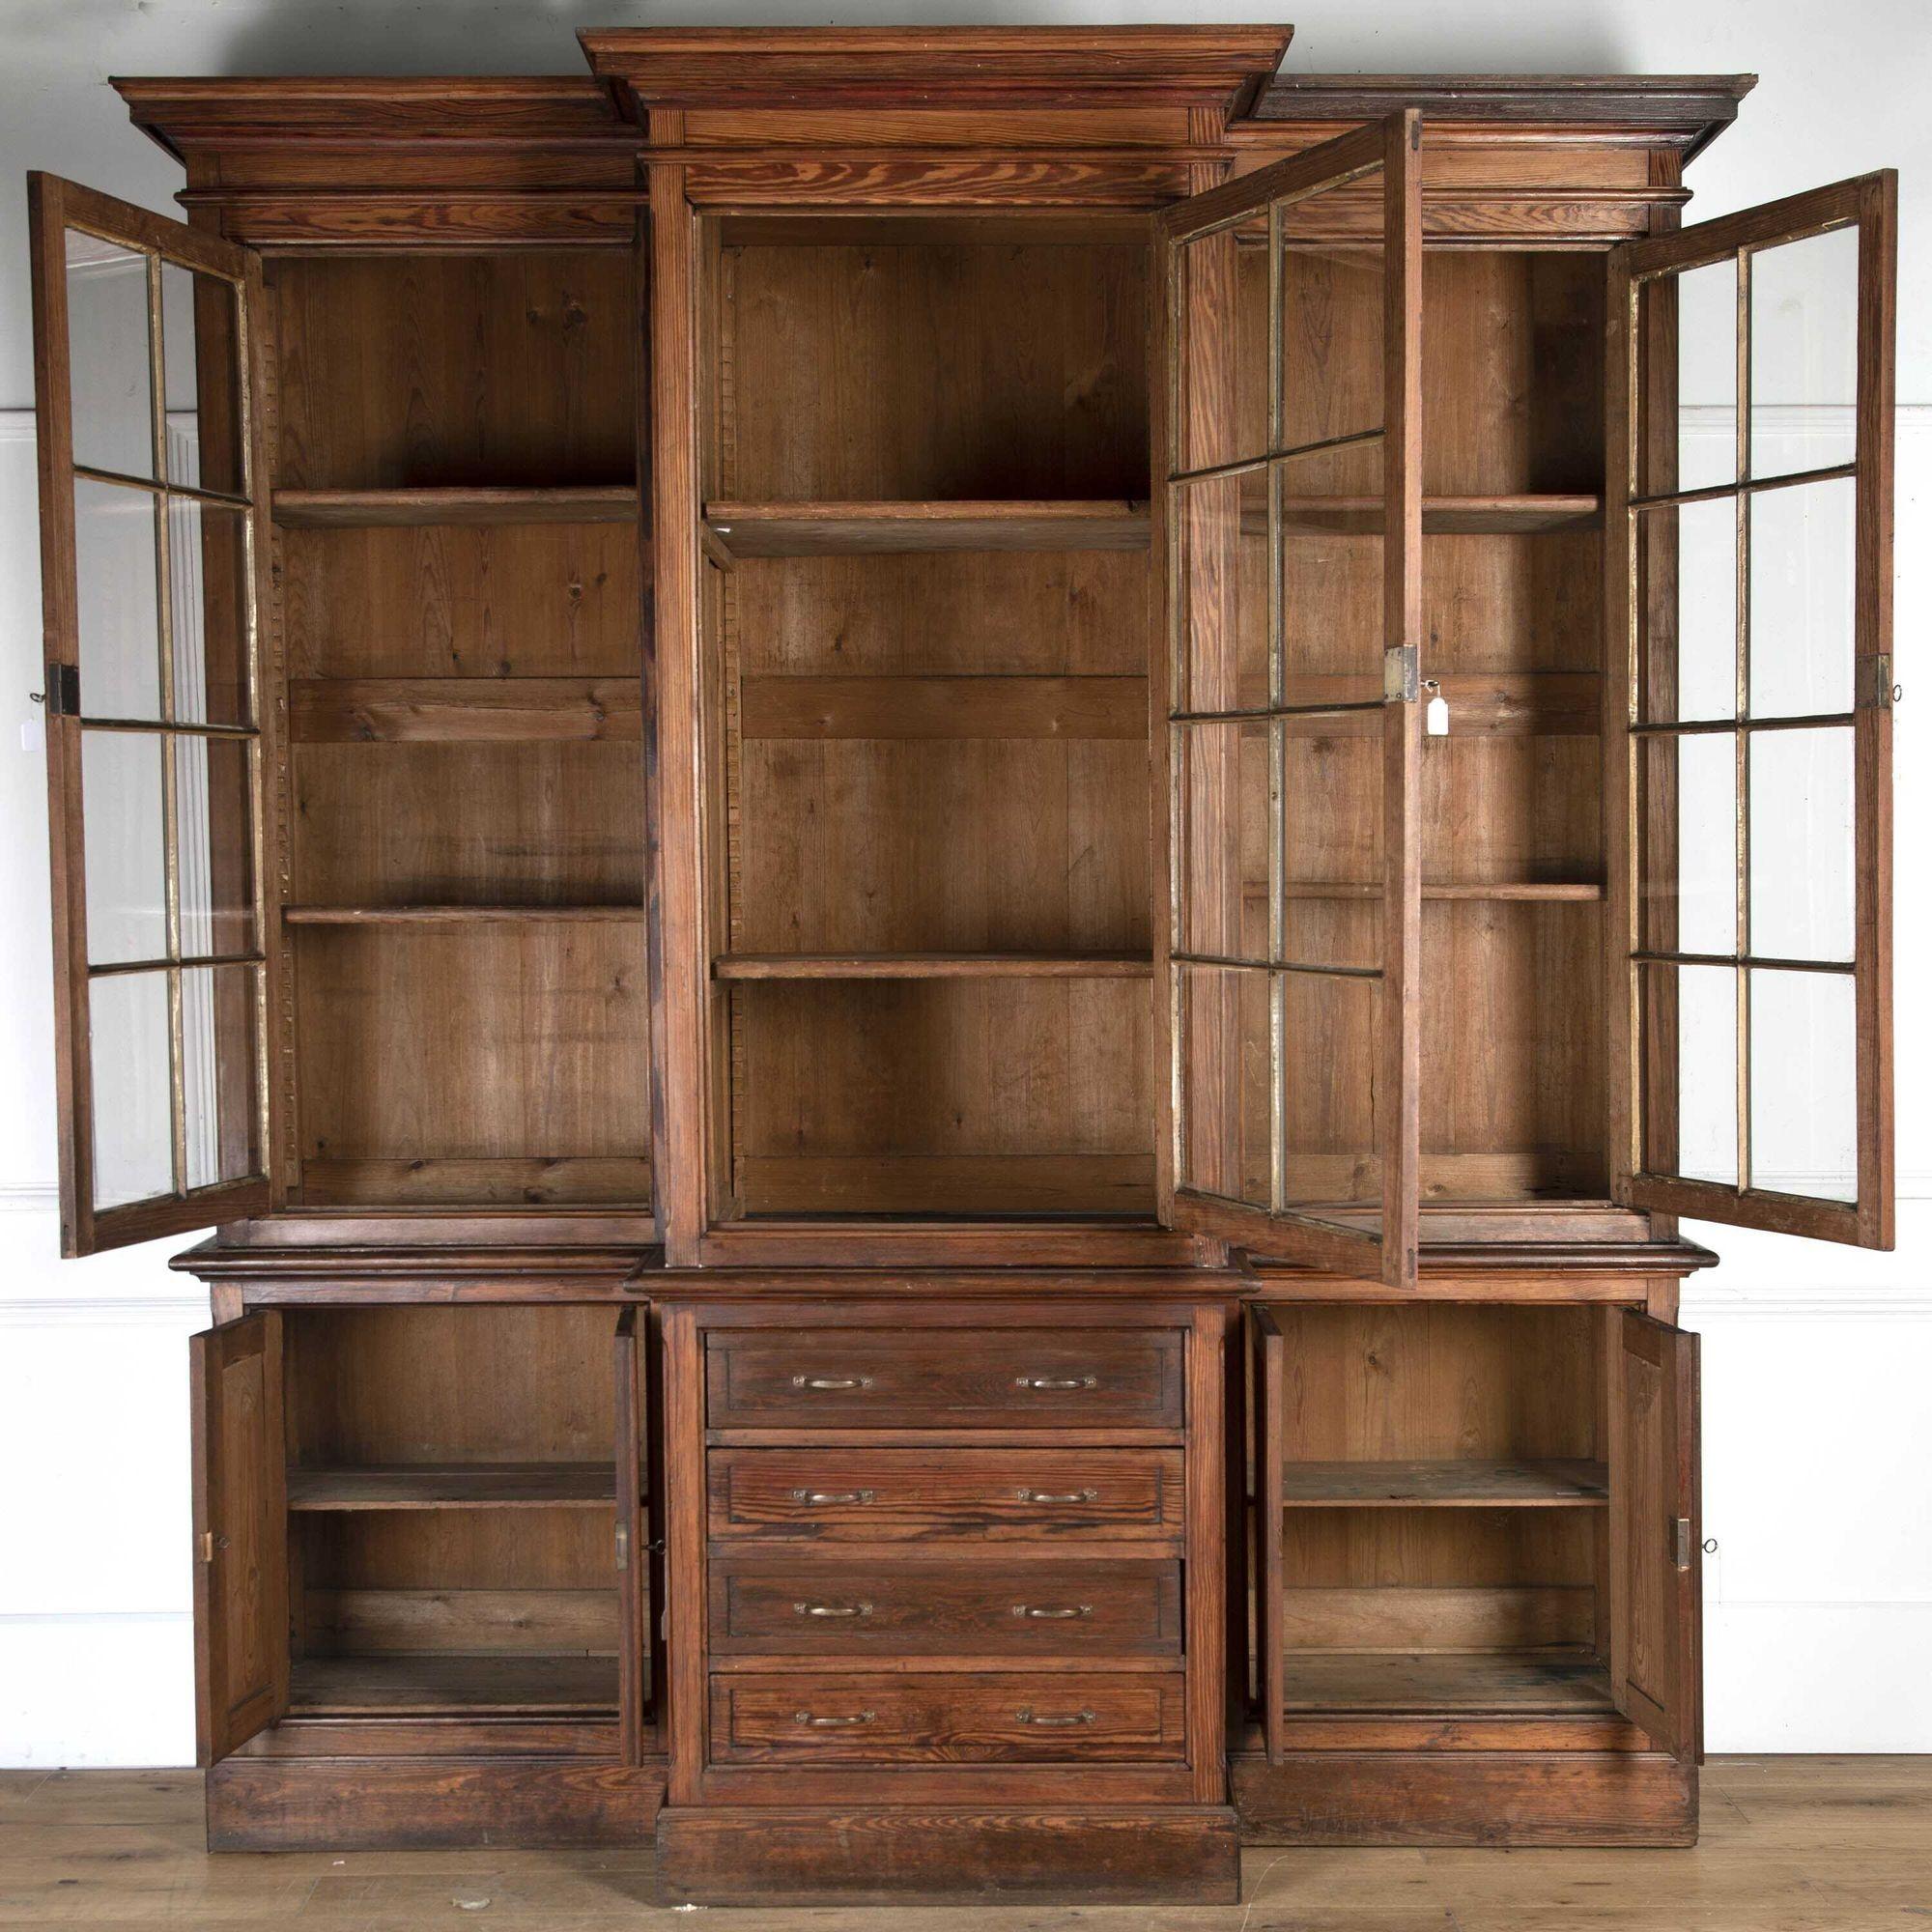 Fantastic two-part pitch pine glazed cabinet with cast-iron glazing bars.
This breakfront vitrine has three glazed doors to the top that open to reveal two spacious shelves. The base also has two sets of double doors that open to the further